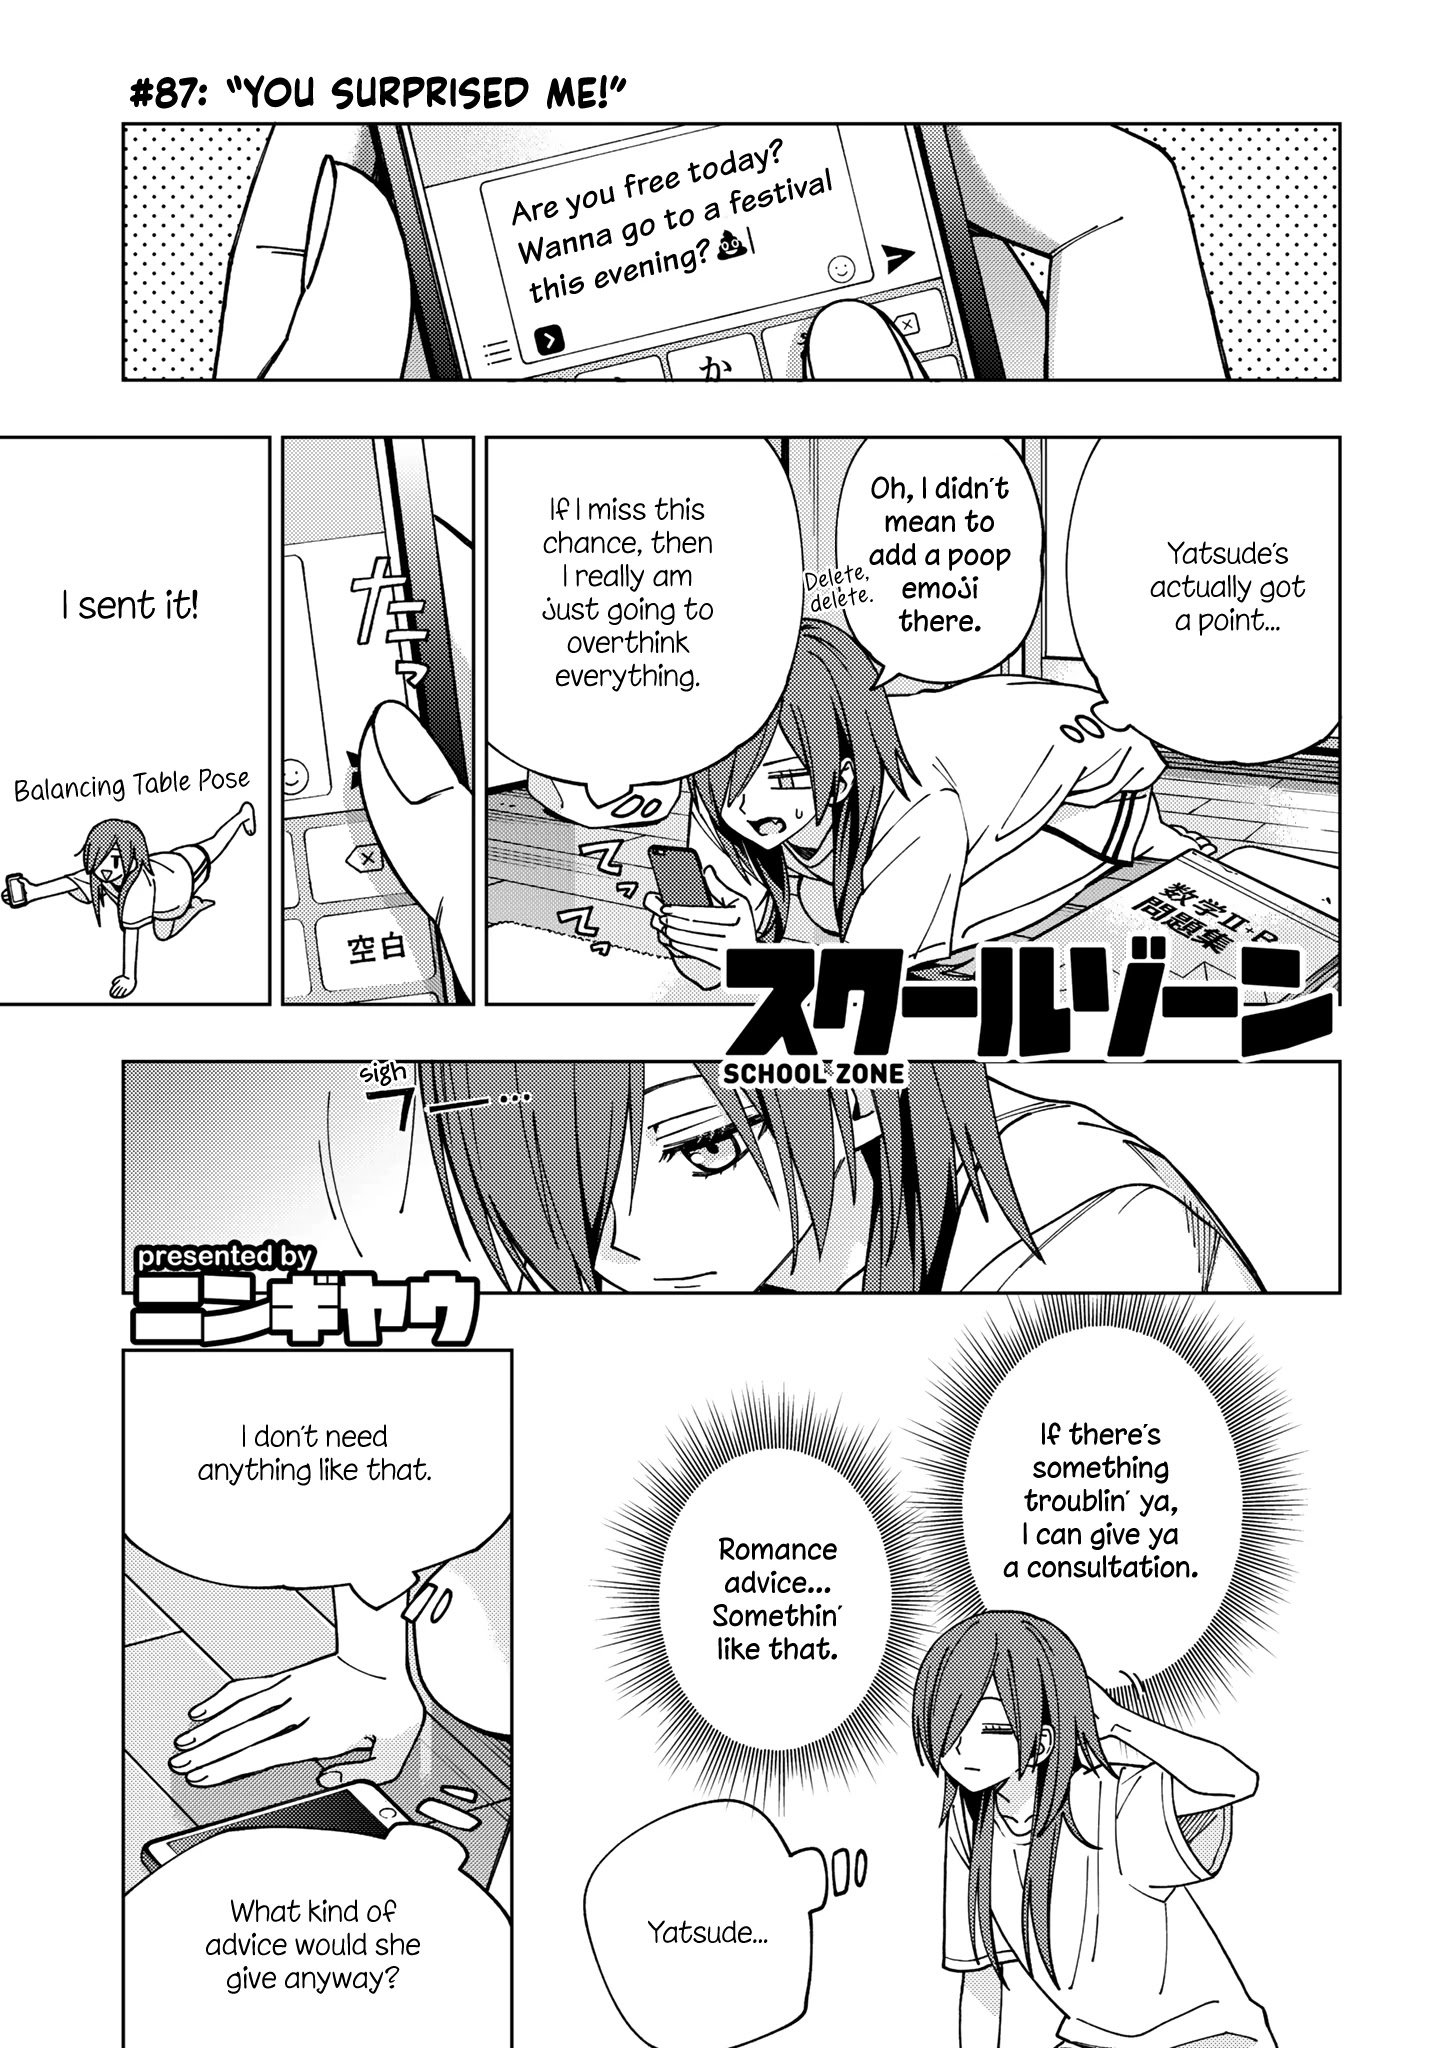 School Zone (Ningiyau) Chapter 87: You Surprised Me! - Picture 1